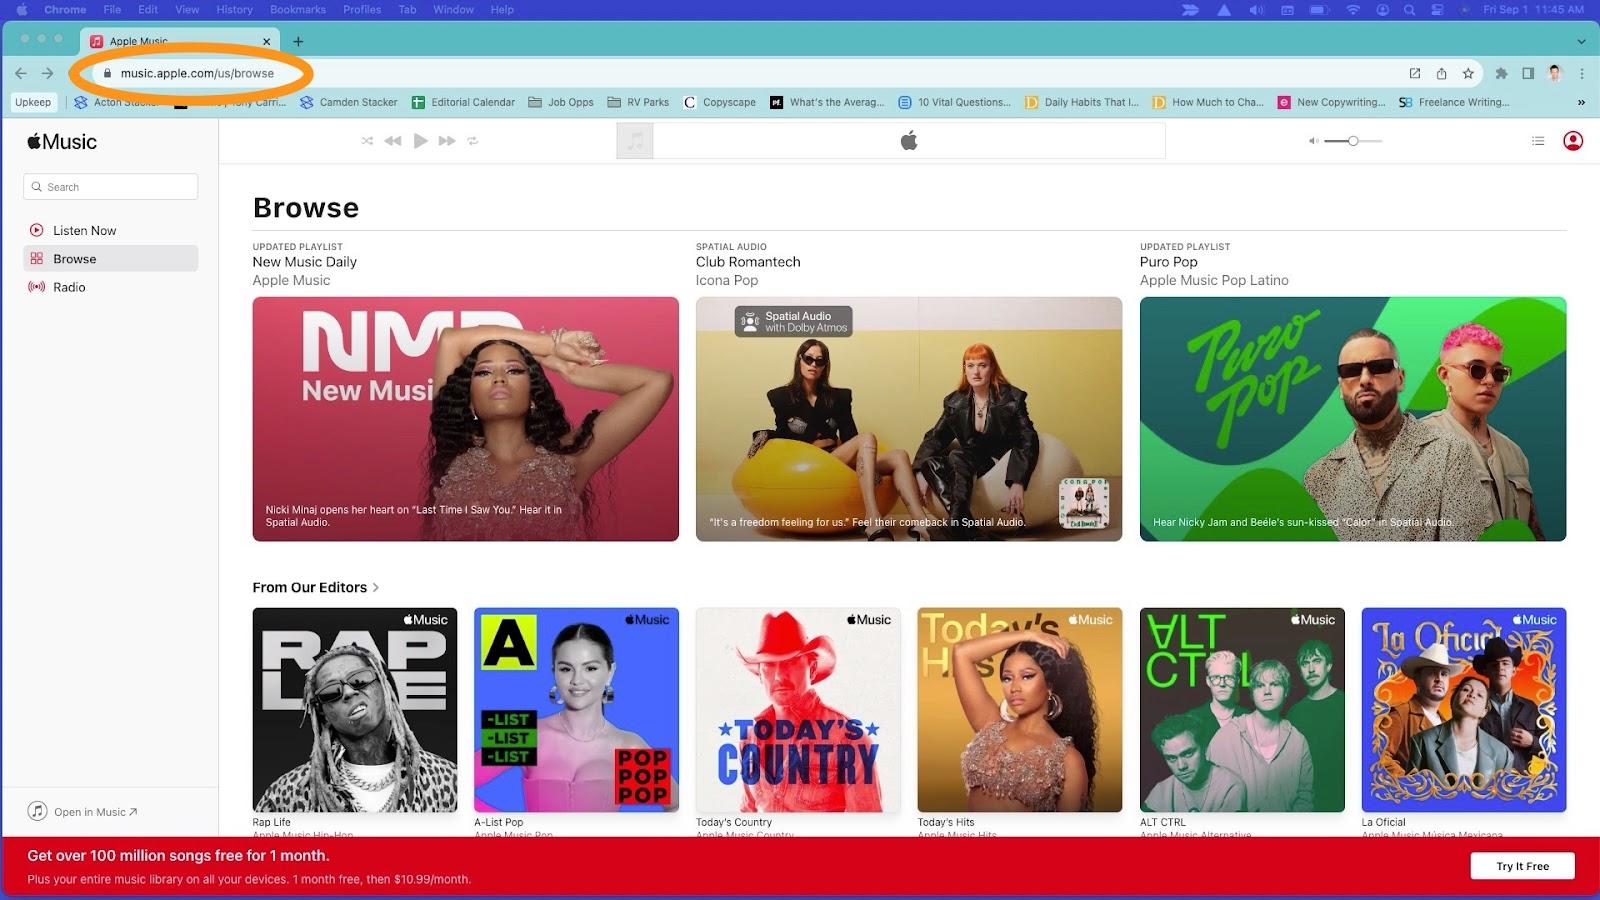 To cancel Apple Music online, go to the website music.apple.com